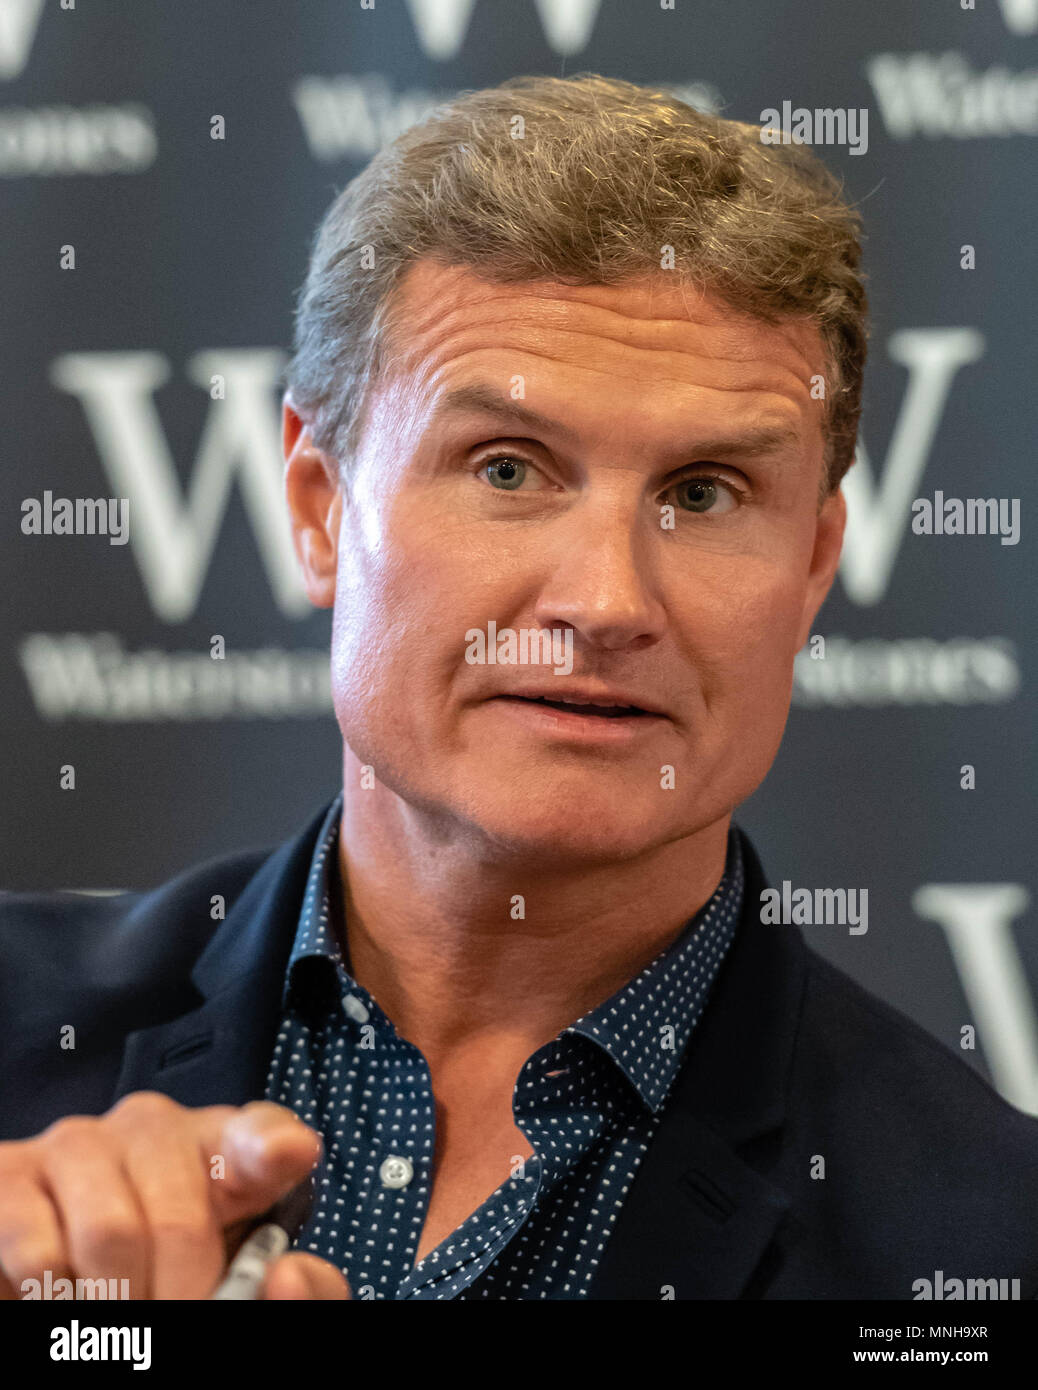 London 17th May 2018 David Coulthard MBE a British former Formula One racing driver turned presenter, commentator and journalist. He was runner-up in the 2001 Formula One World Drivers' Championship, driving for McLaren.  He was signing copies of his new book “The Winning Formula at Waterstones, Leadenhall Market London Credit Ian Davidson/Alamy Live News Stock Photo